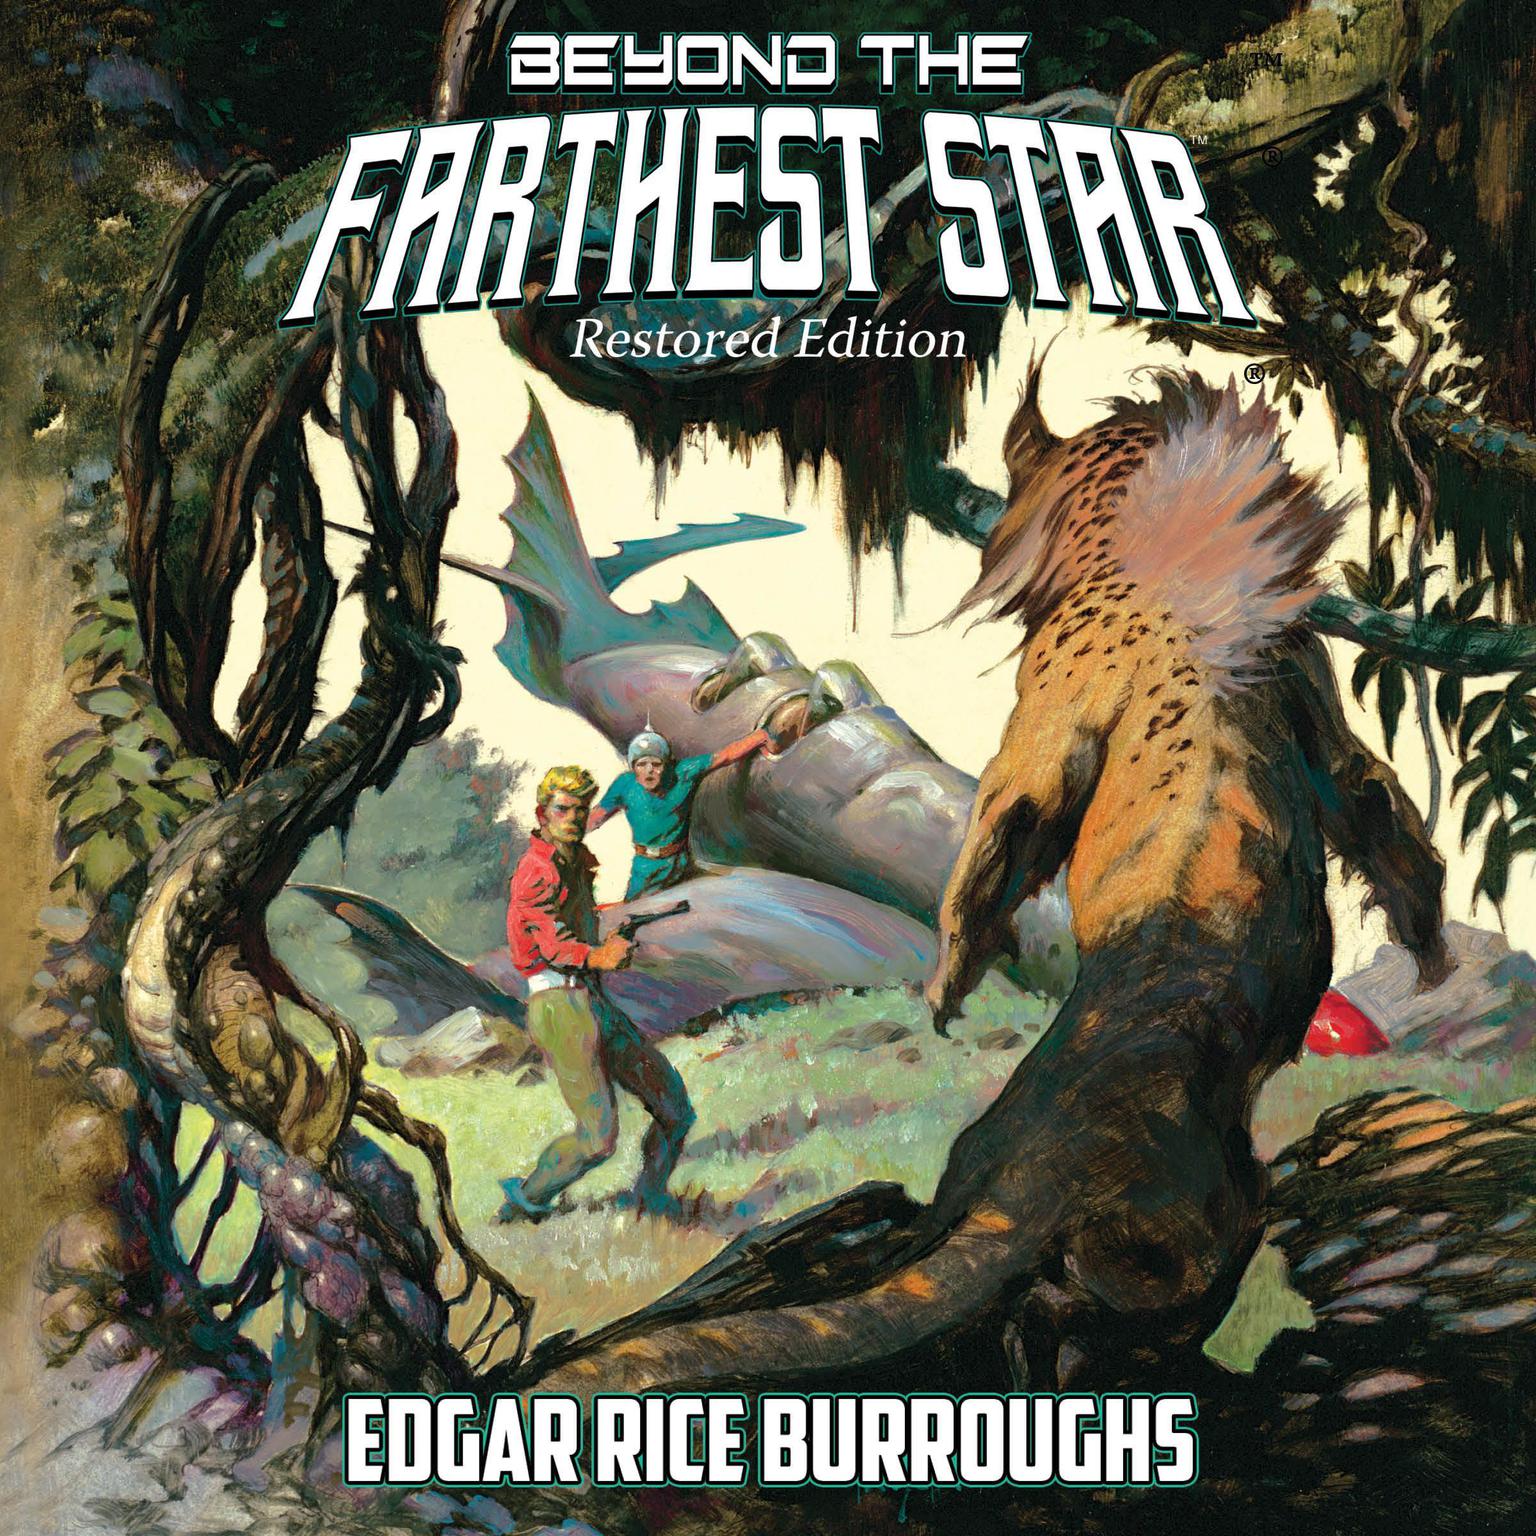 Beyond the Farthest Star: Restored Edition: Restored Edition Audiobook, by Edgar Rice Burroughs